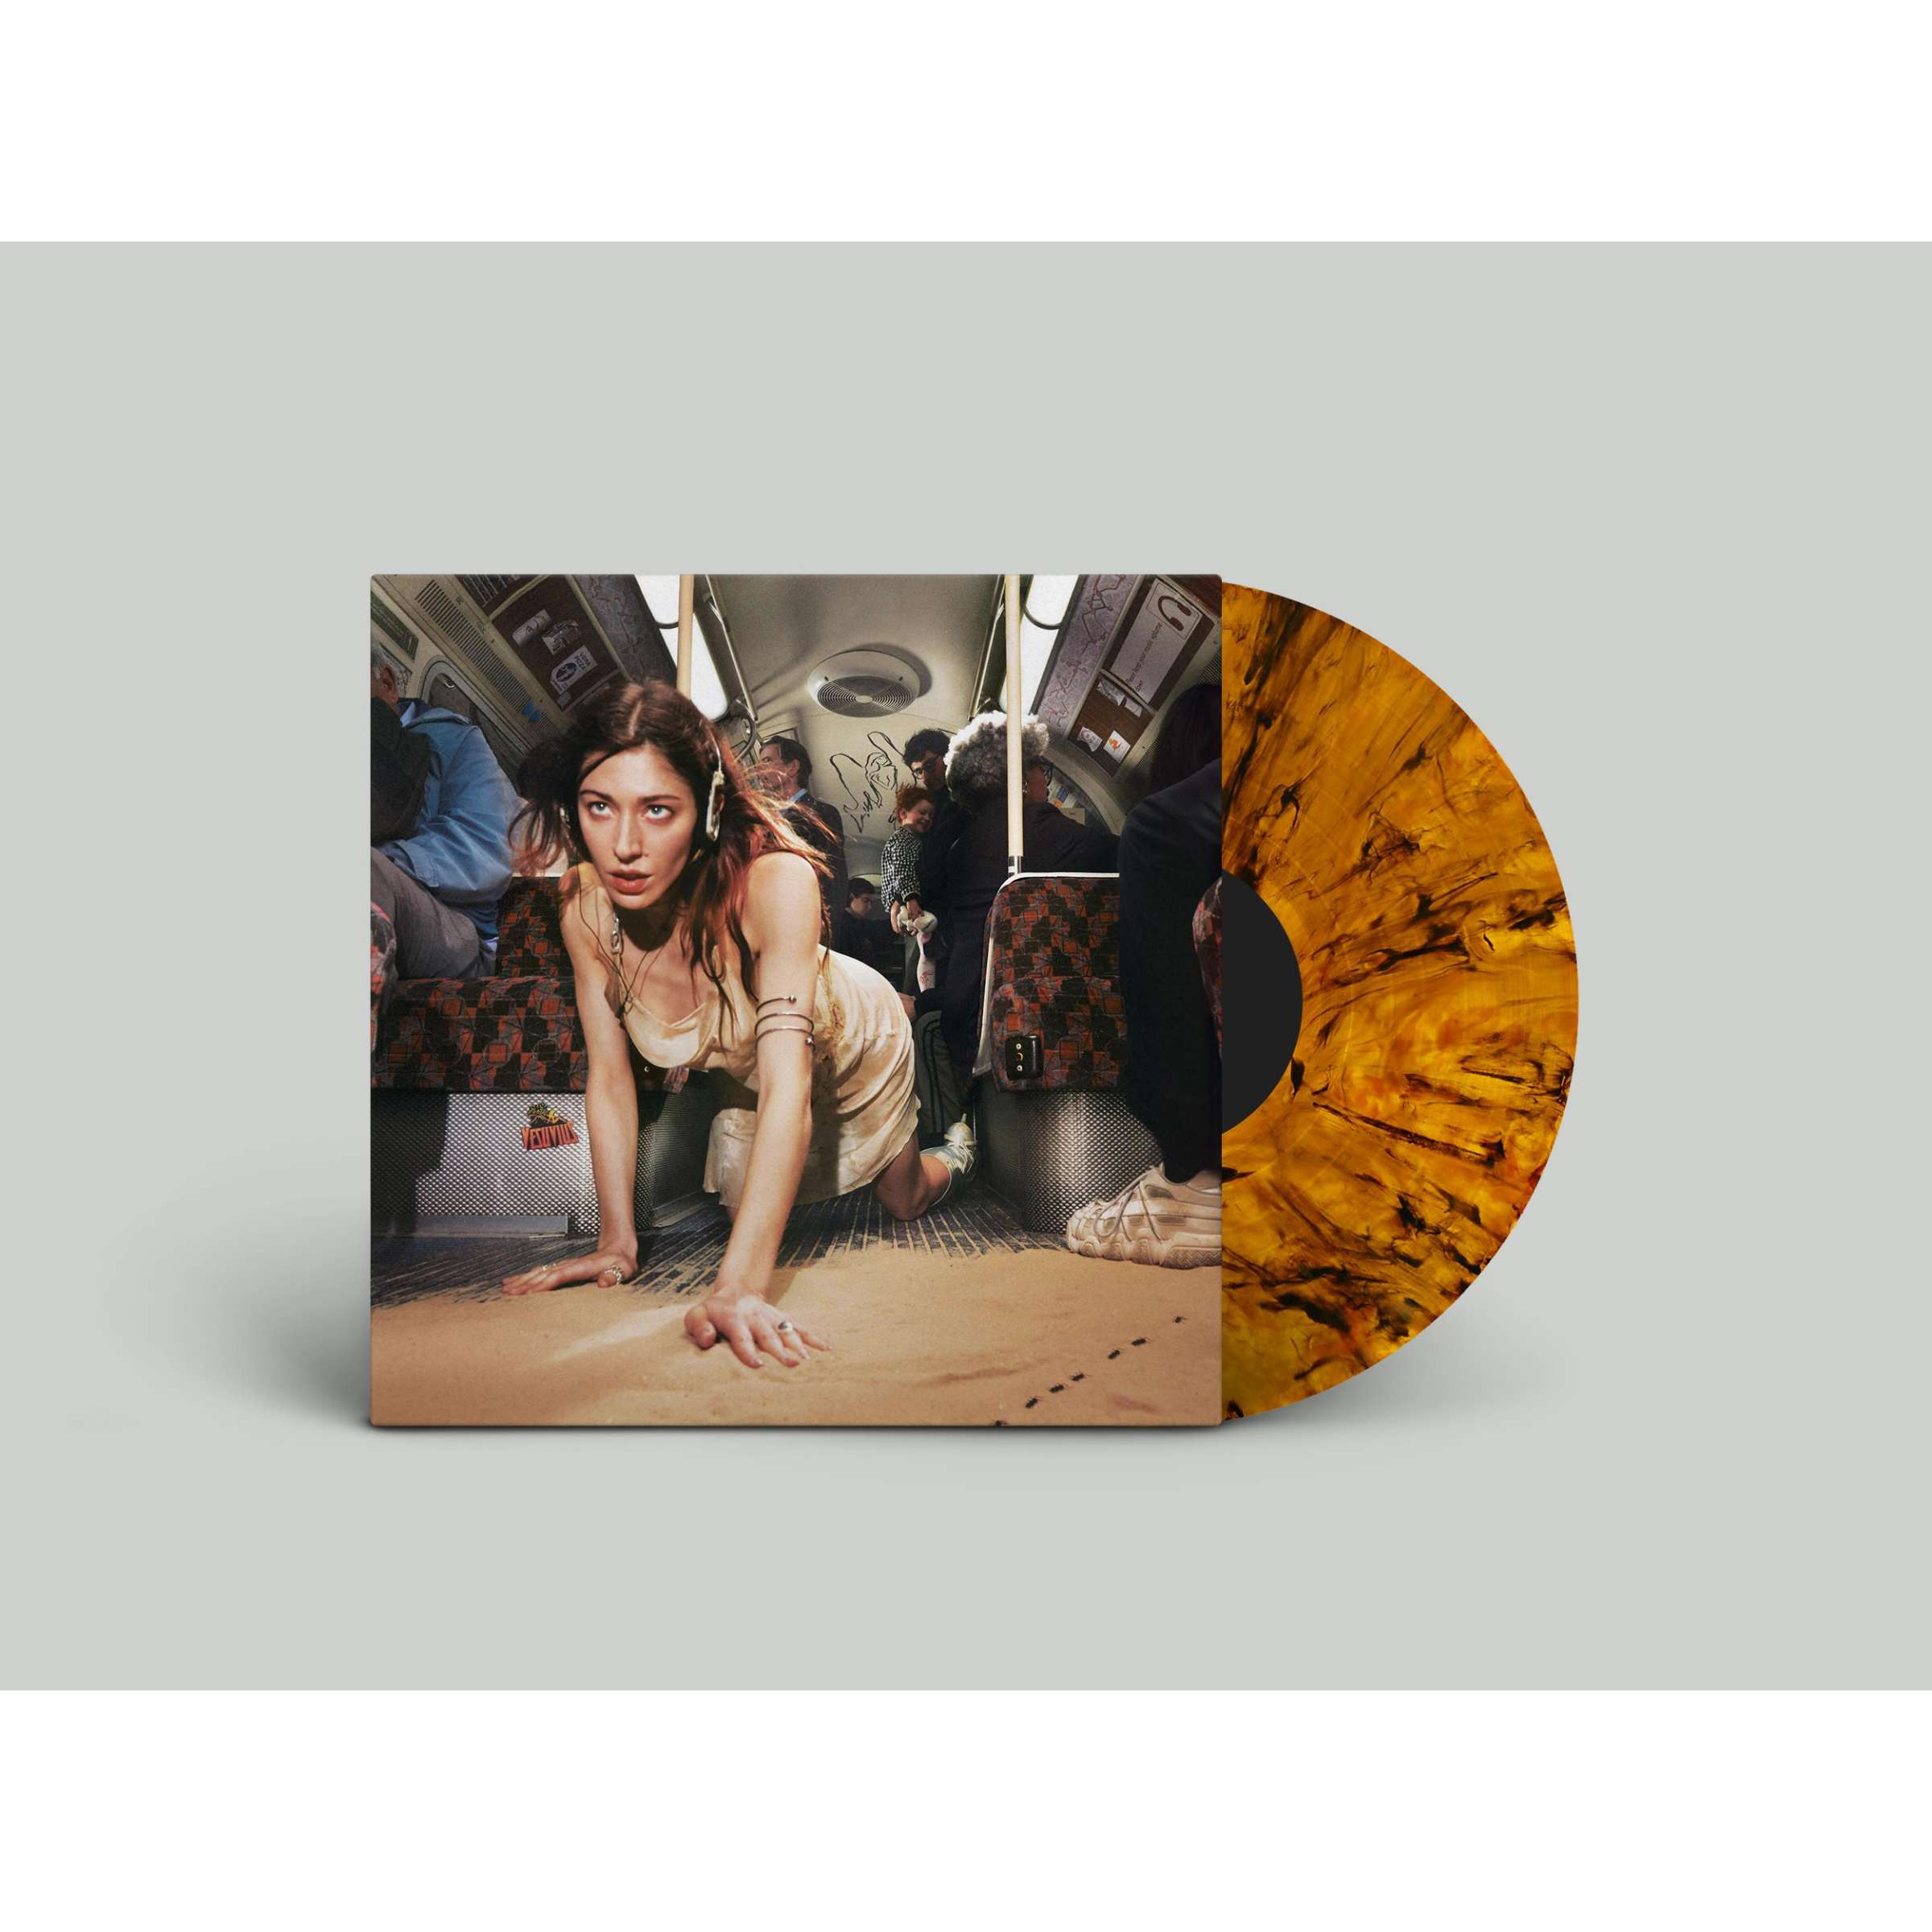 DESIRE, I WANT TO TURN INTO YOU - TIGER VINYL EDITION